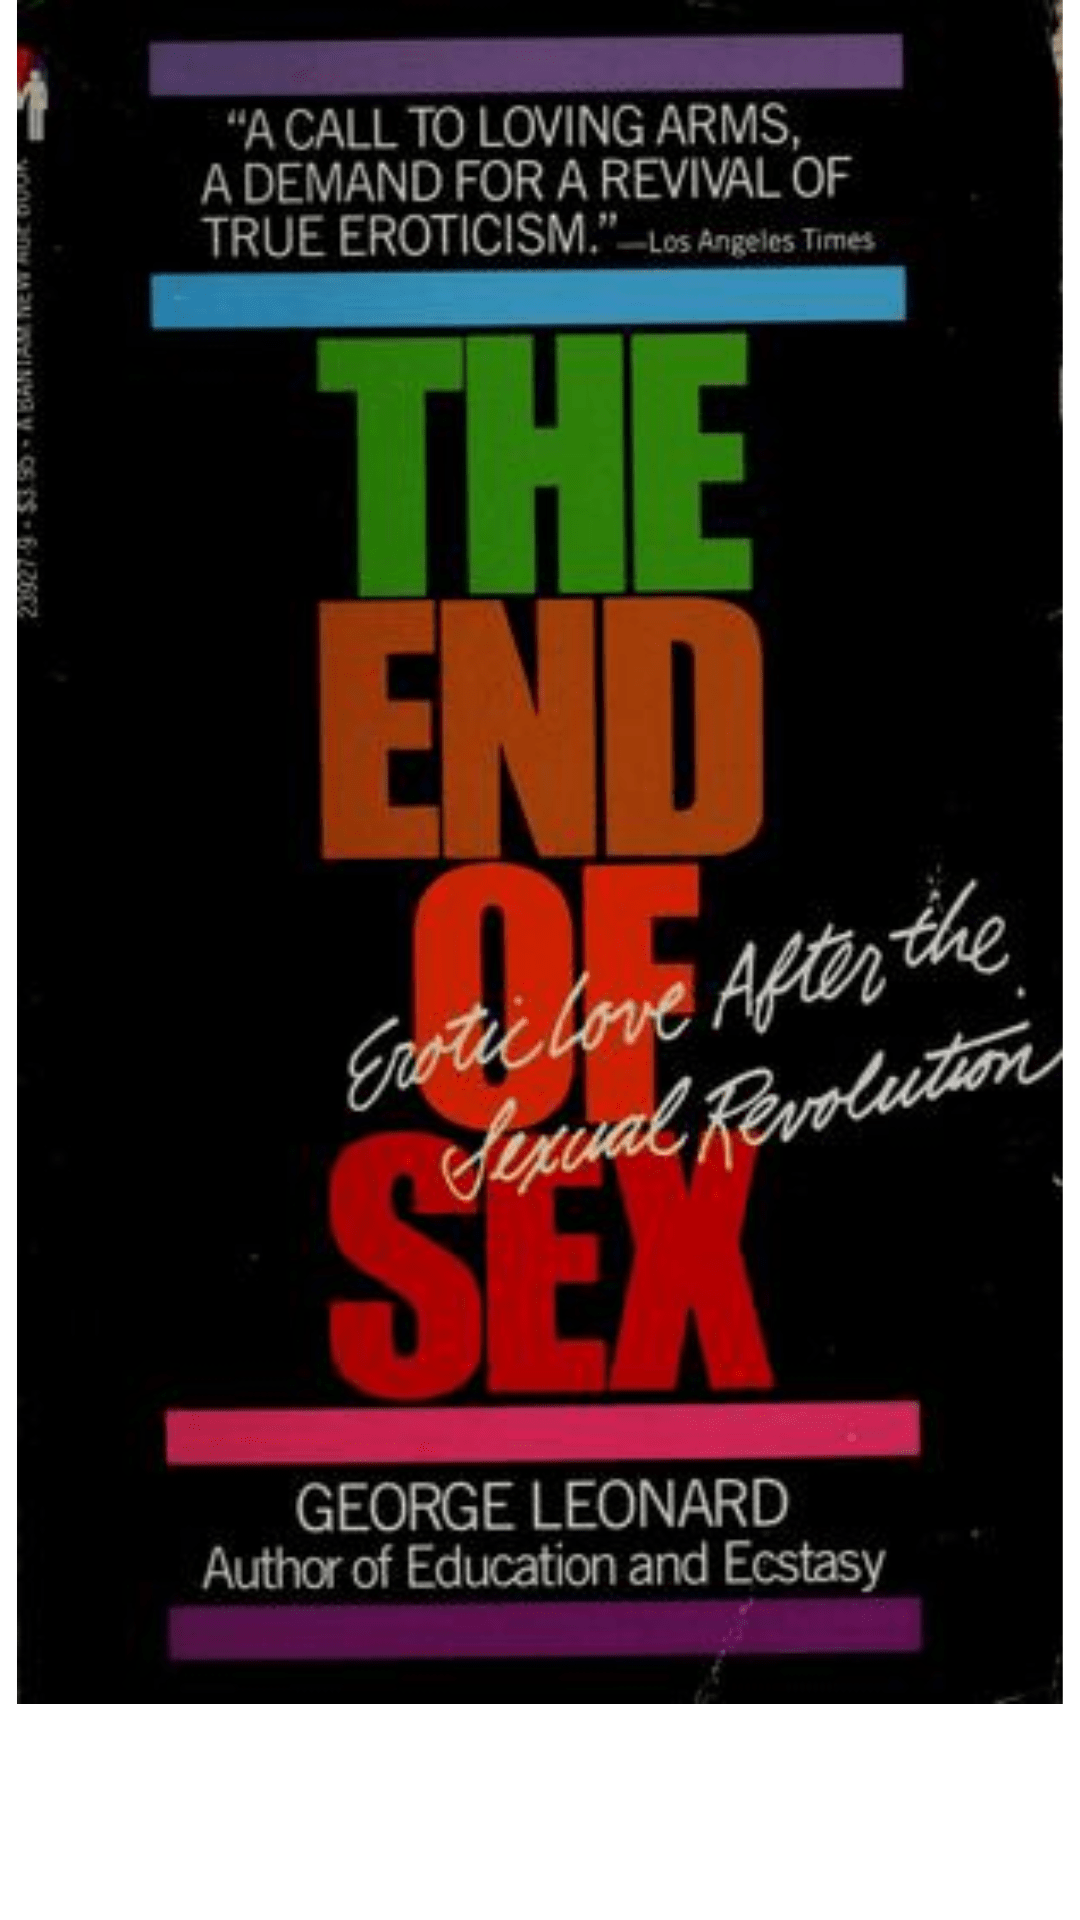 The End of Sex: Erotic Love After the Sexual Revolution